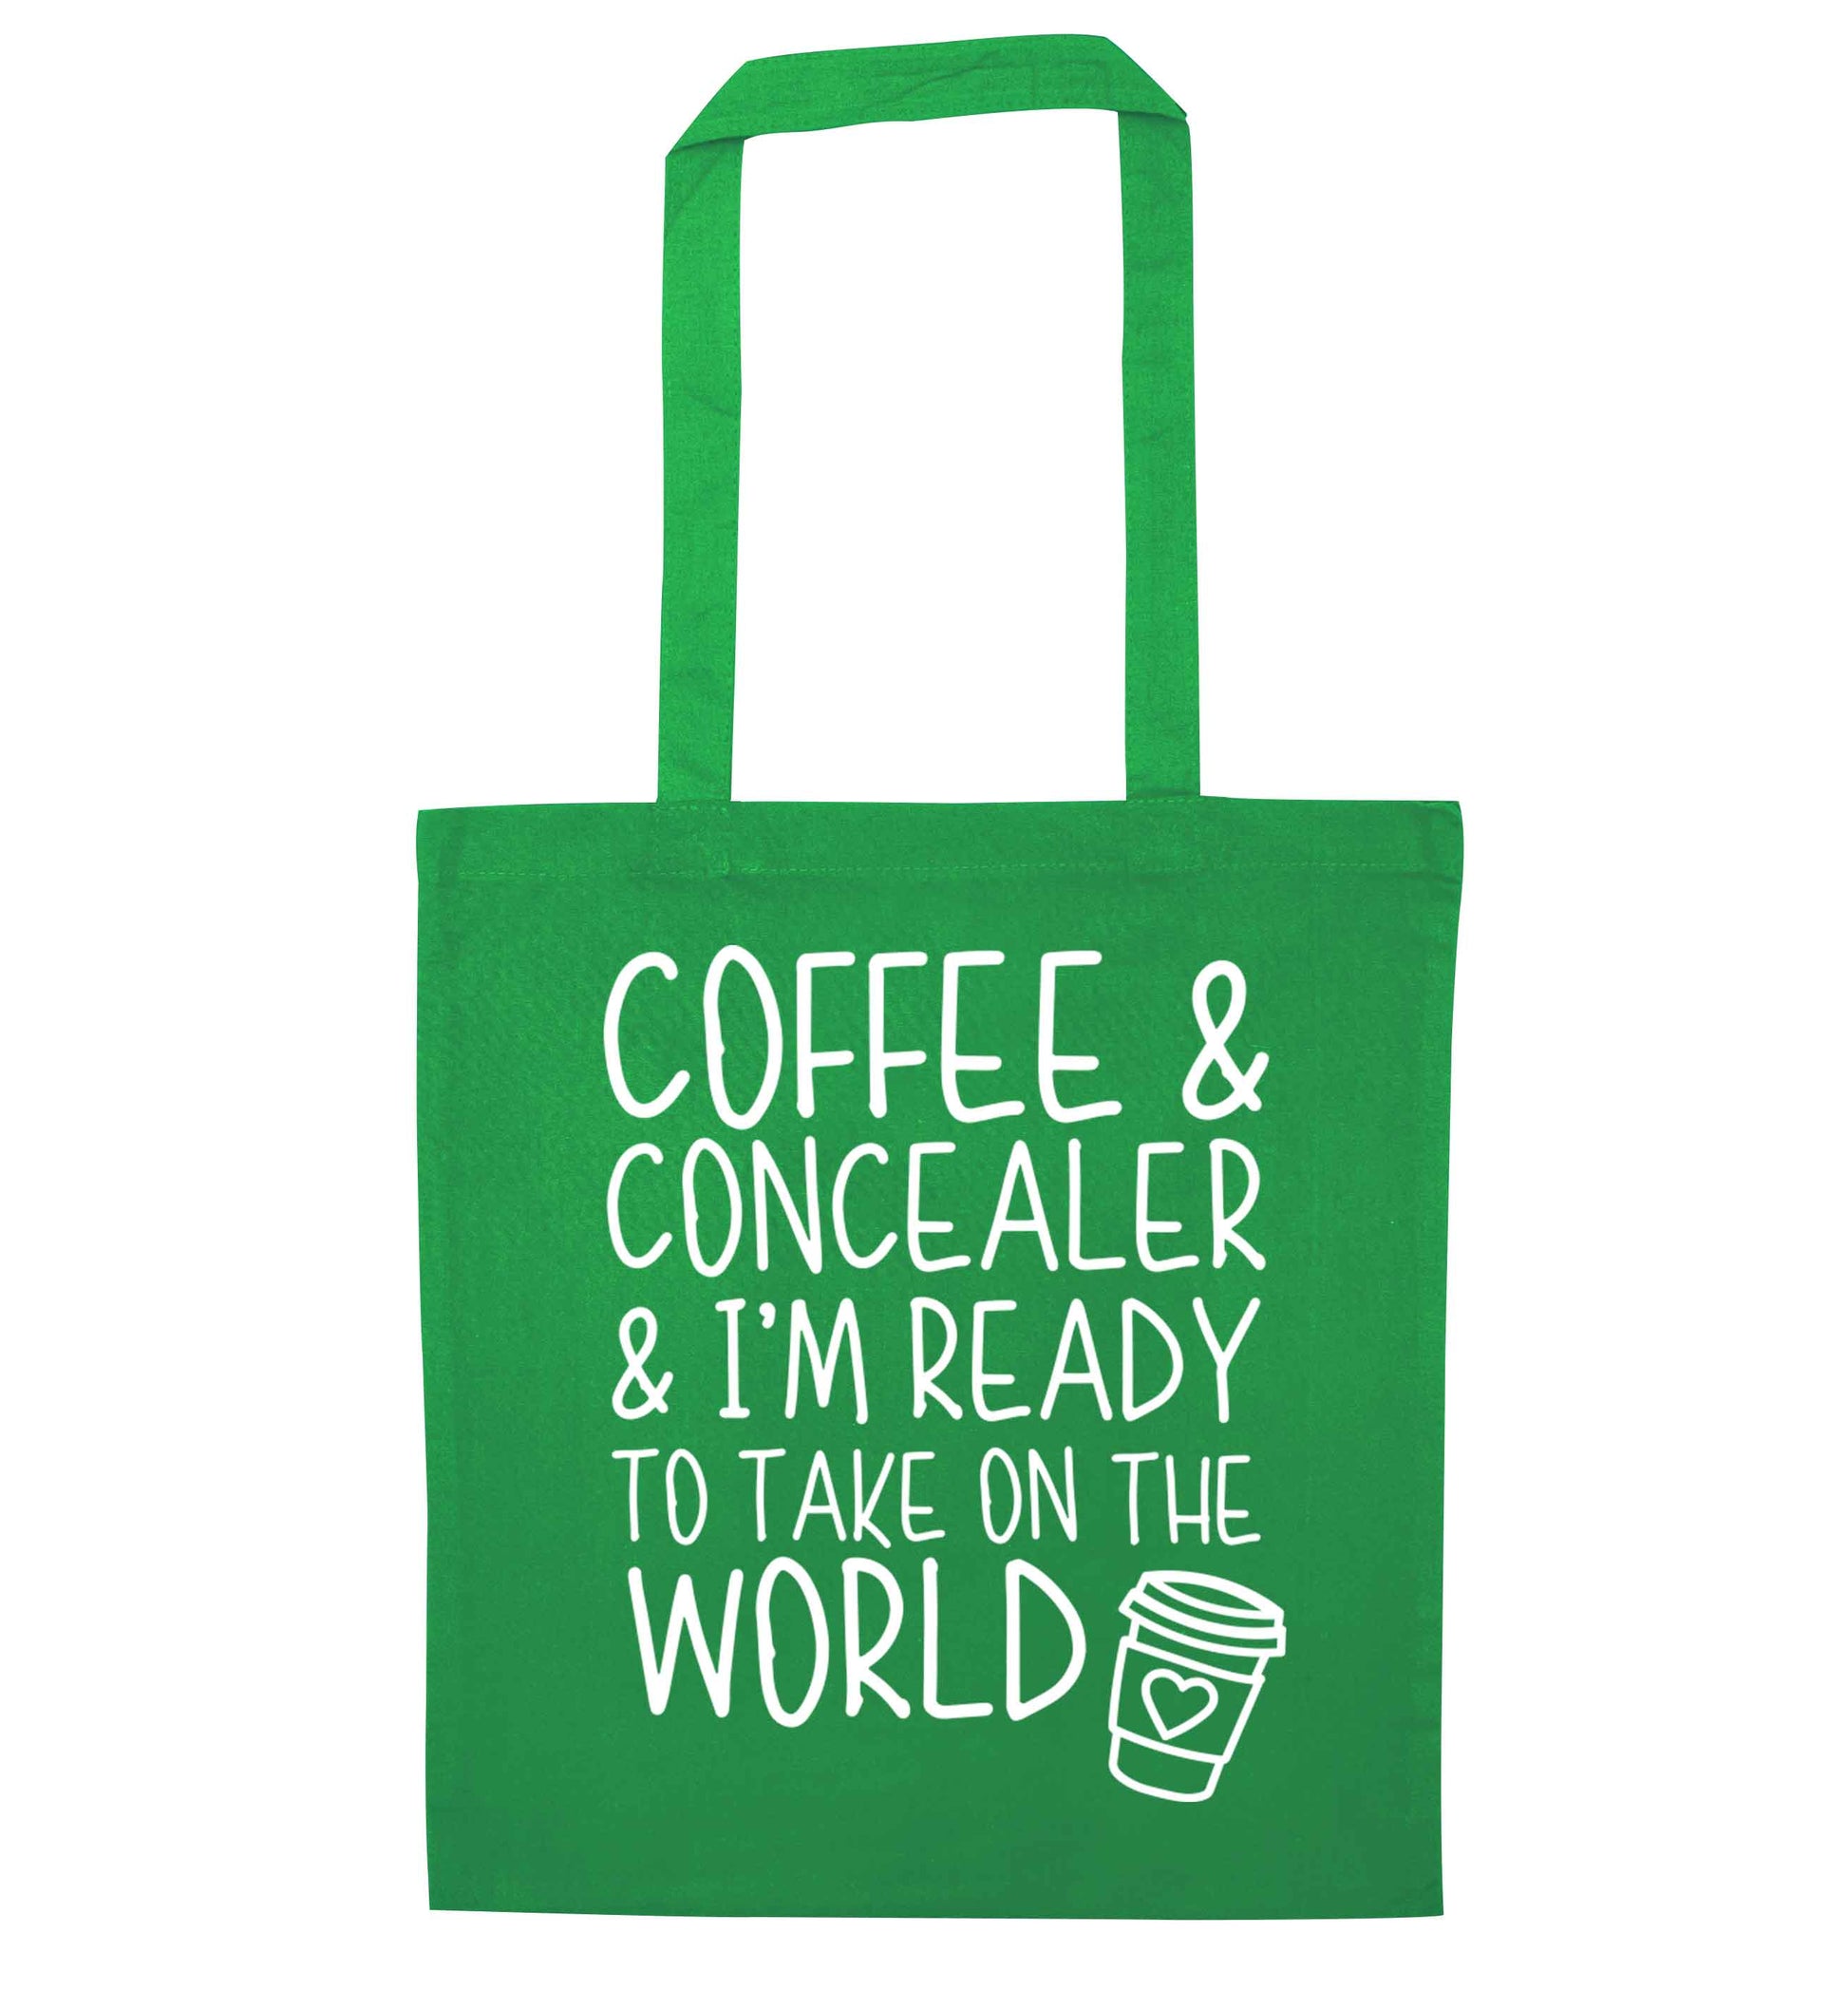 Coffee and concealer and I'm ready to take on the world green tote bag